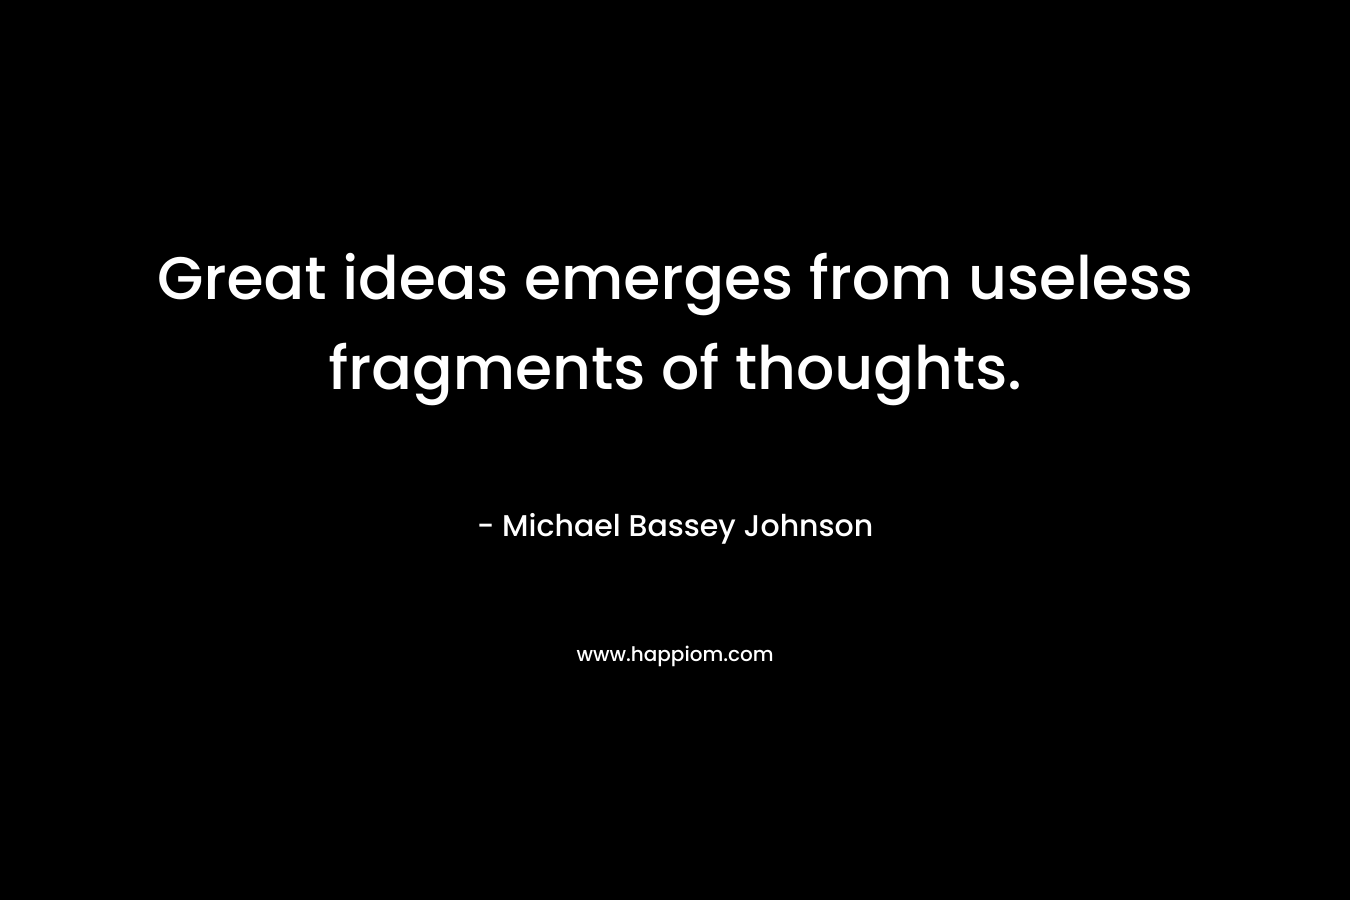 Great ideas emerges from useless fragments of thoughts.